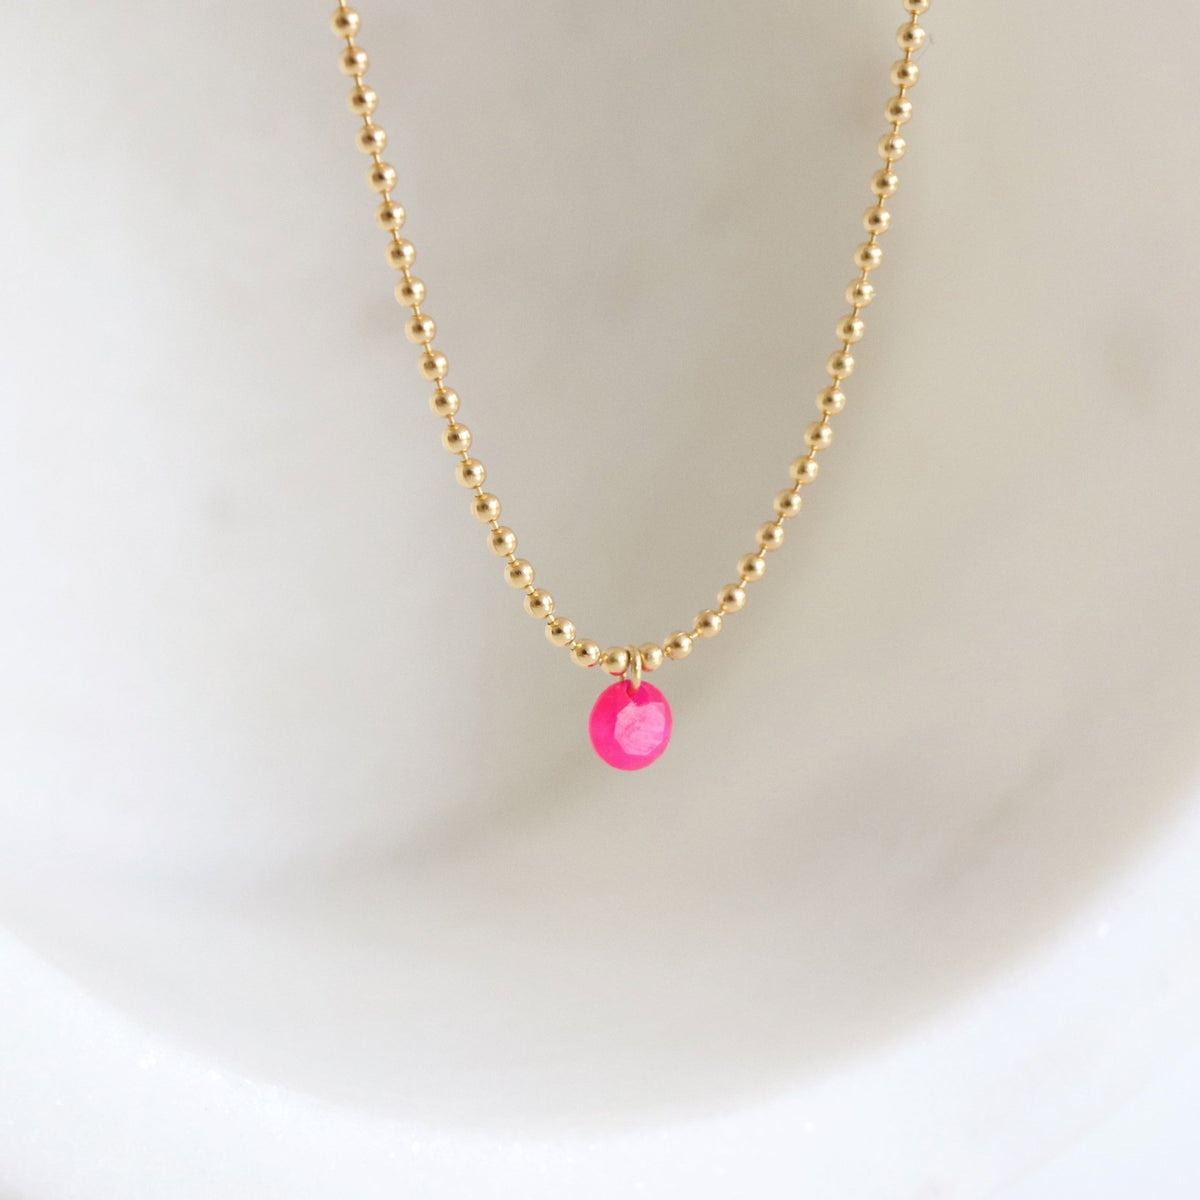 DAINTY RADIANT SOLITAIRE NECKLACE - HOT PINK CHALCEDONY &amp; GOLD - SO PRETTY CARA COTTER